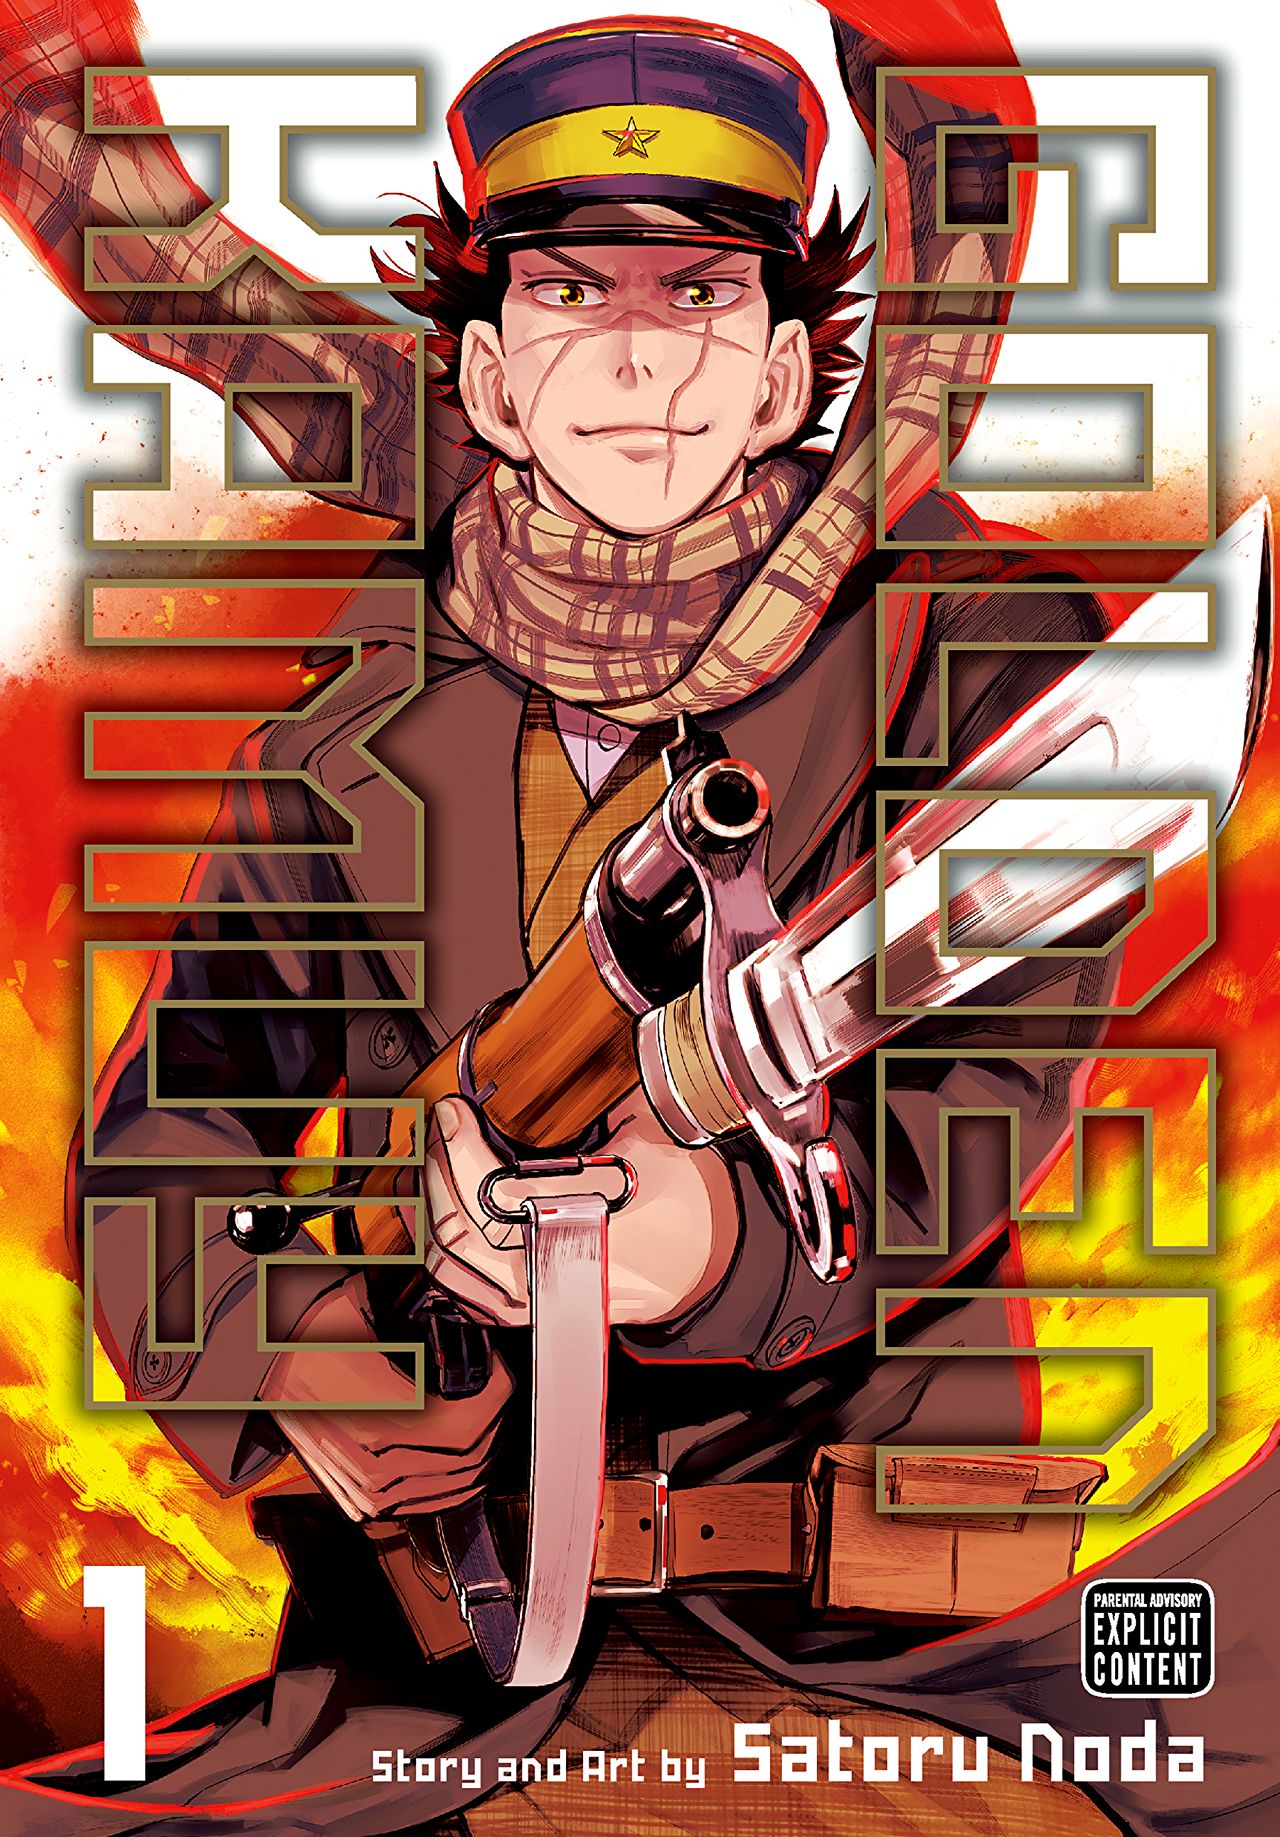 Golden Kamuy Vol. 1 Review